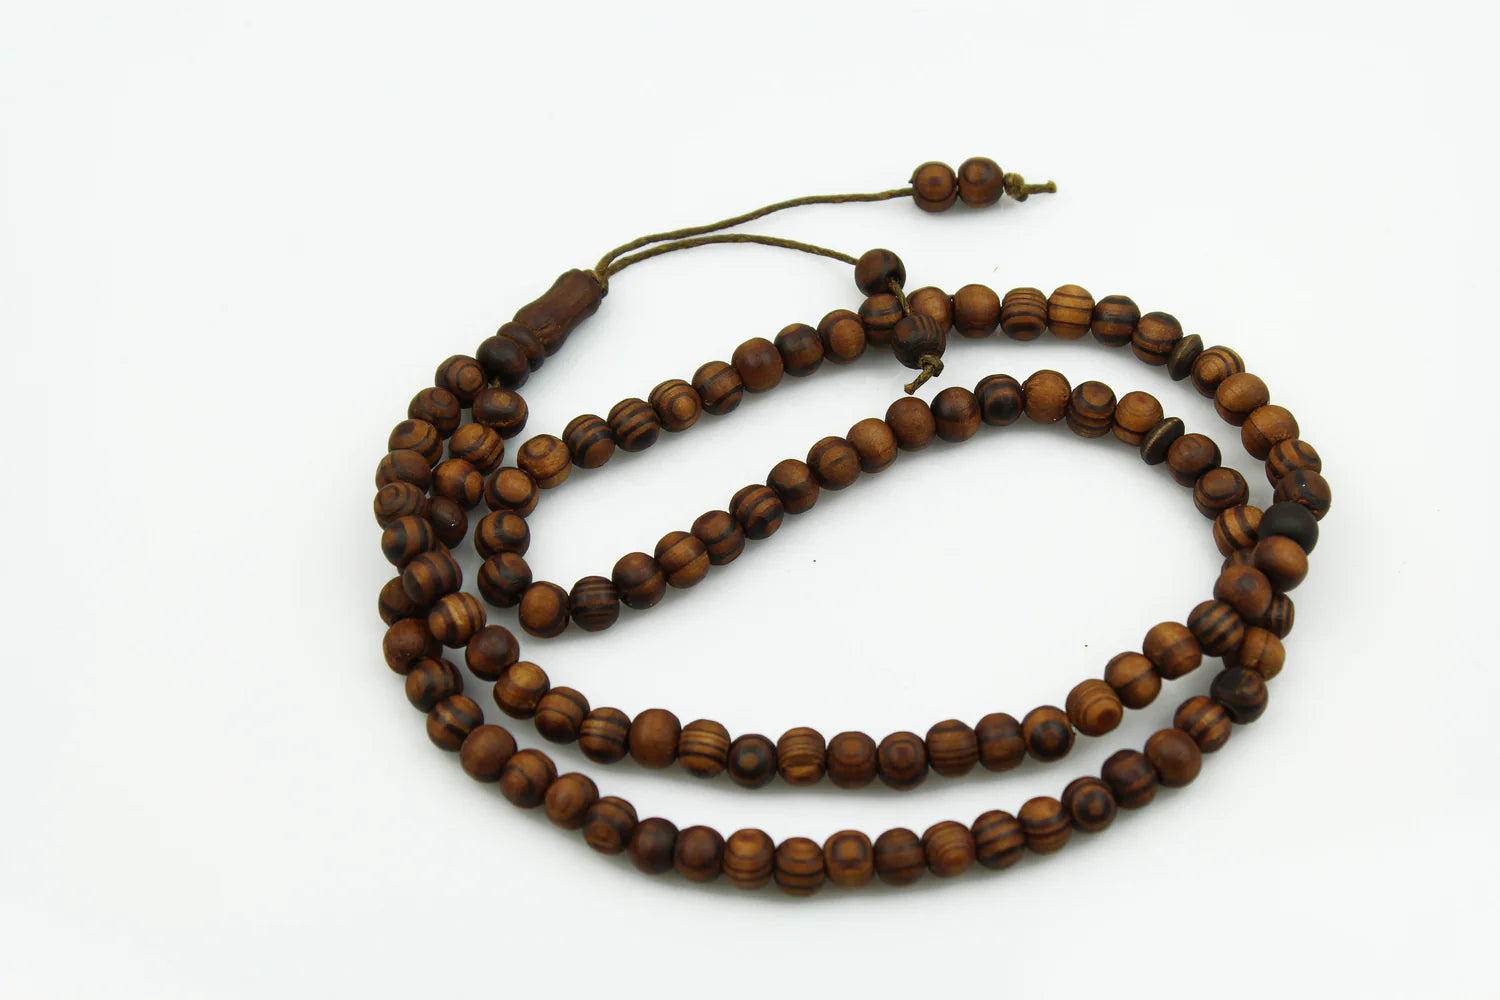 Wooden Dhikr Bead - 99 Beads